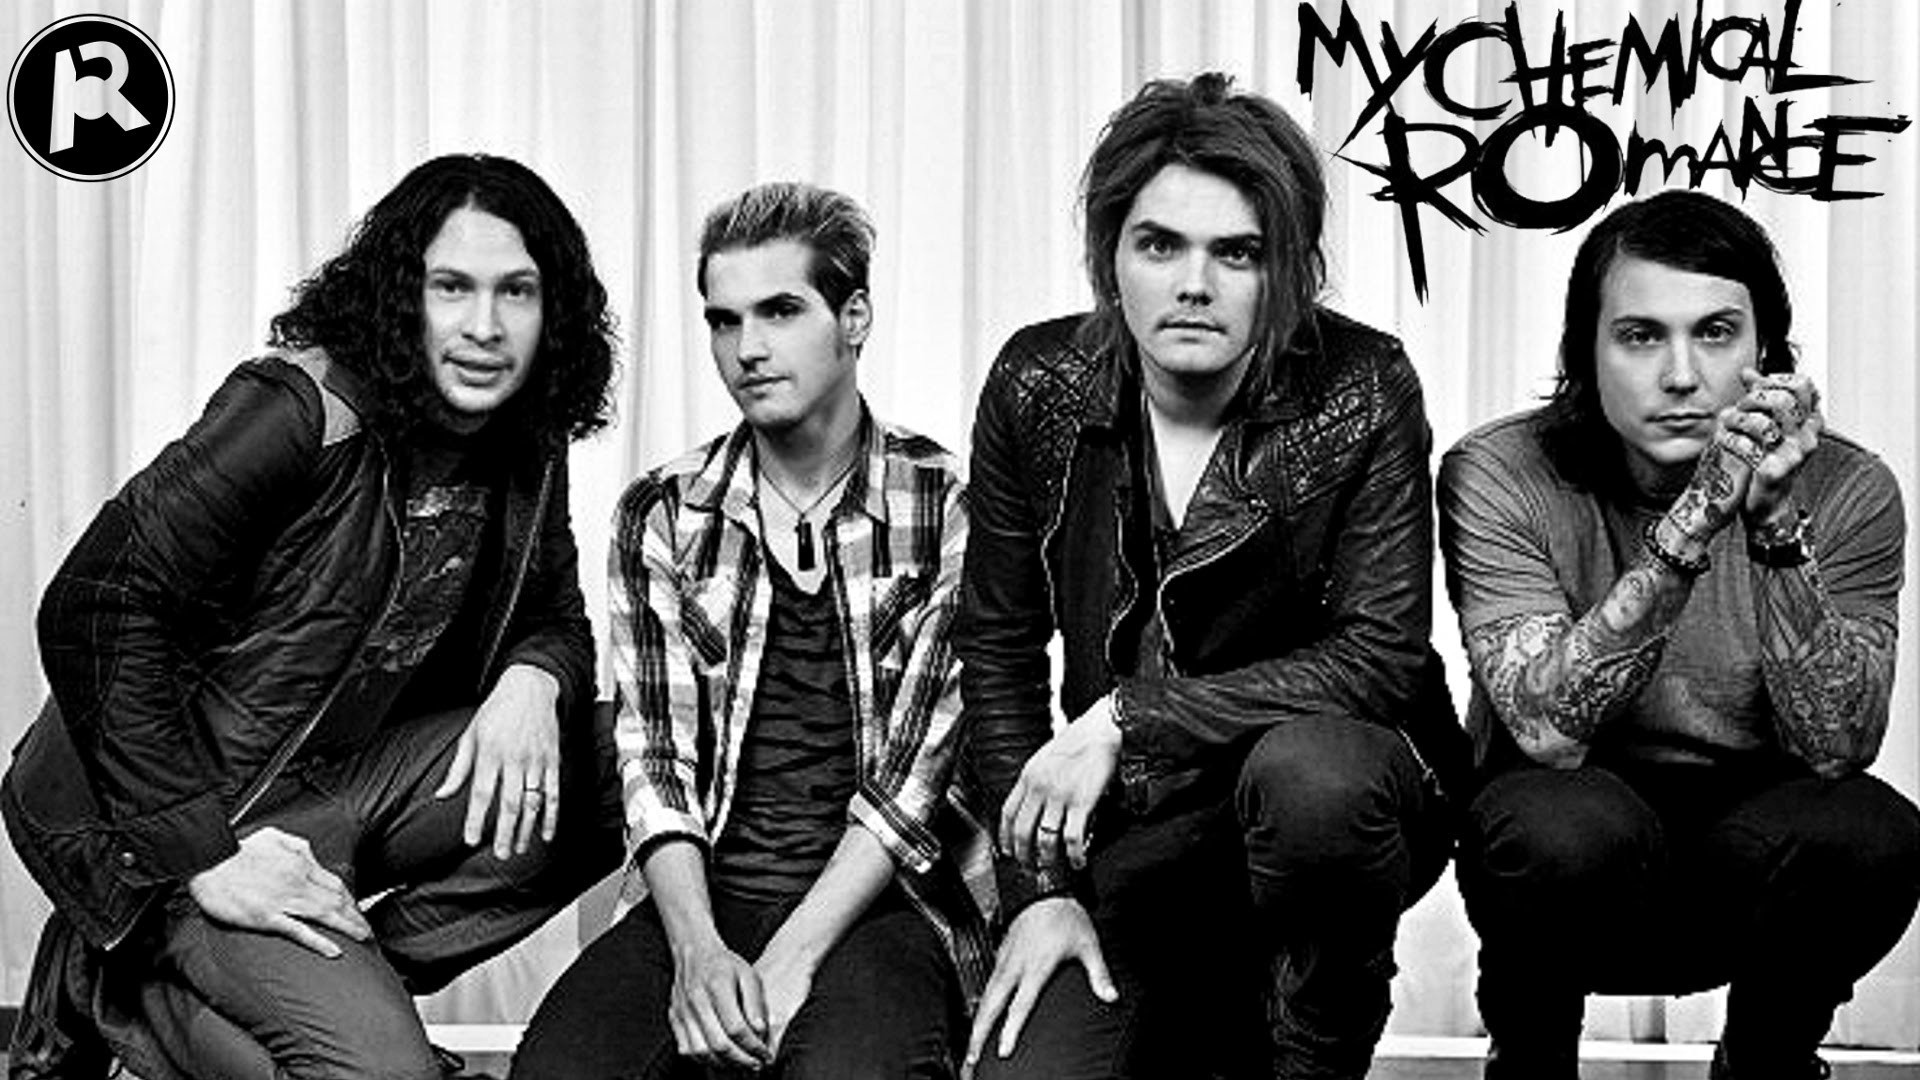 My Chemical Romance Wallpaper (59+ images)1920 x 1080